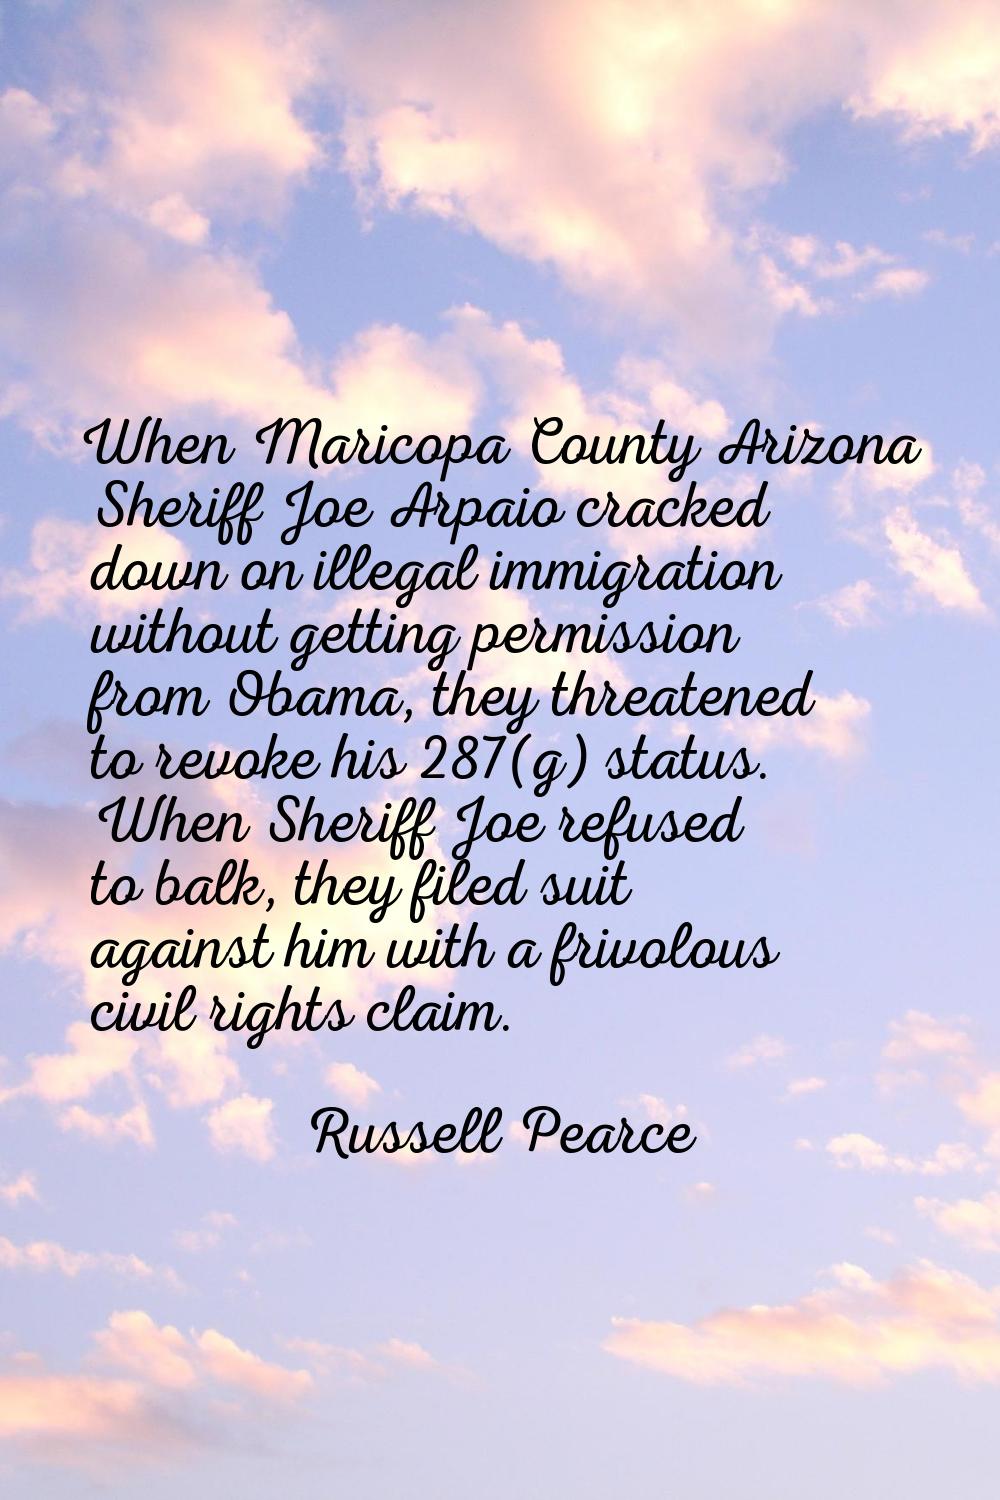 When Maricopa County Arizona Sheriff Joe Arpaio cracked down on illegal immigration without getting